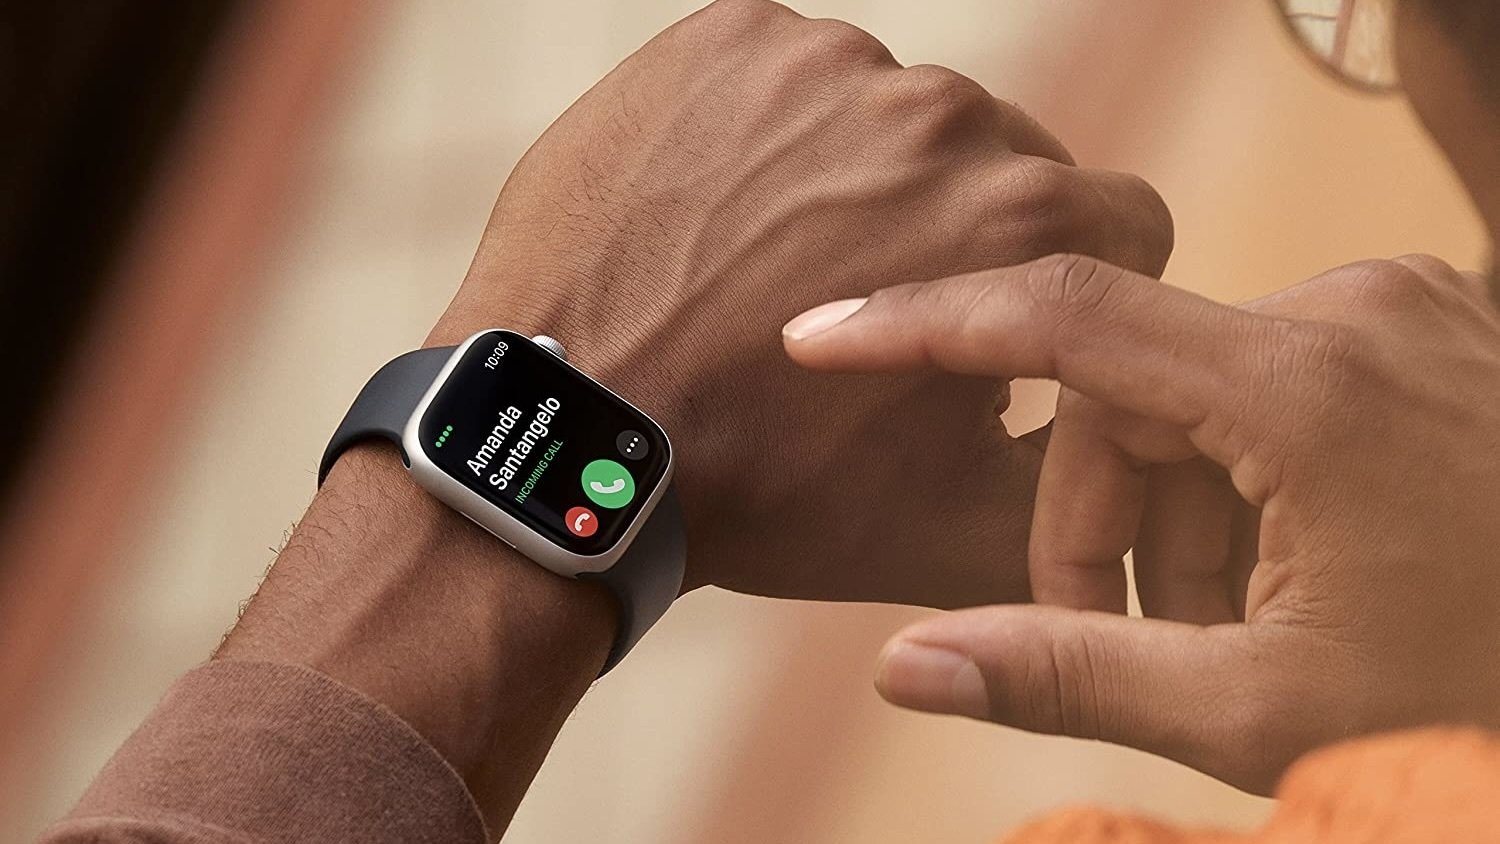 The early Black Friday Apple Watch deals are just okay so far